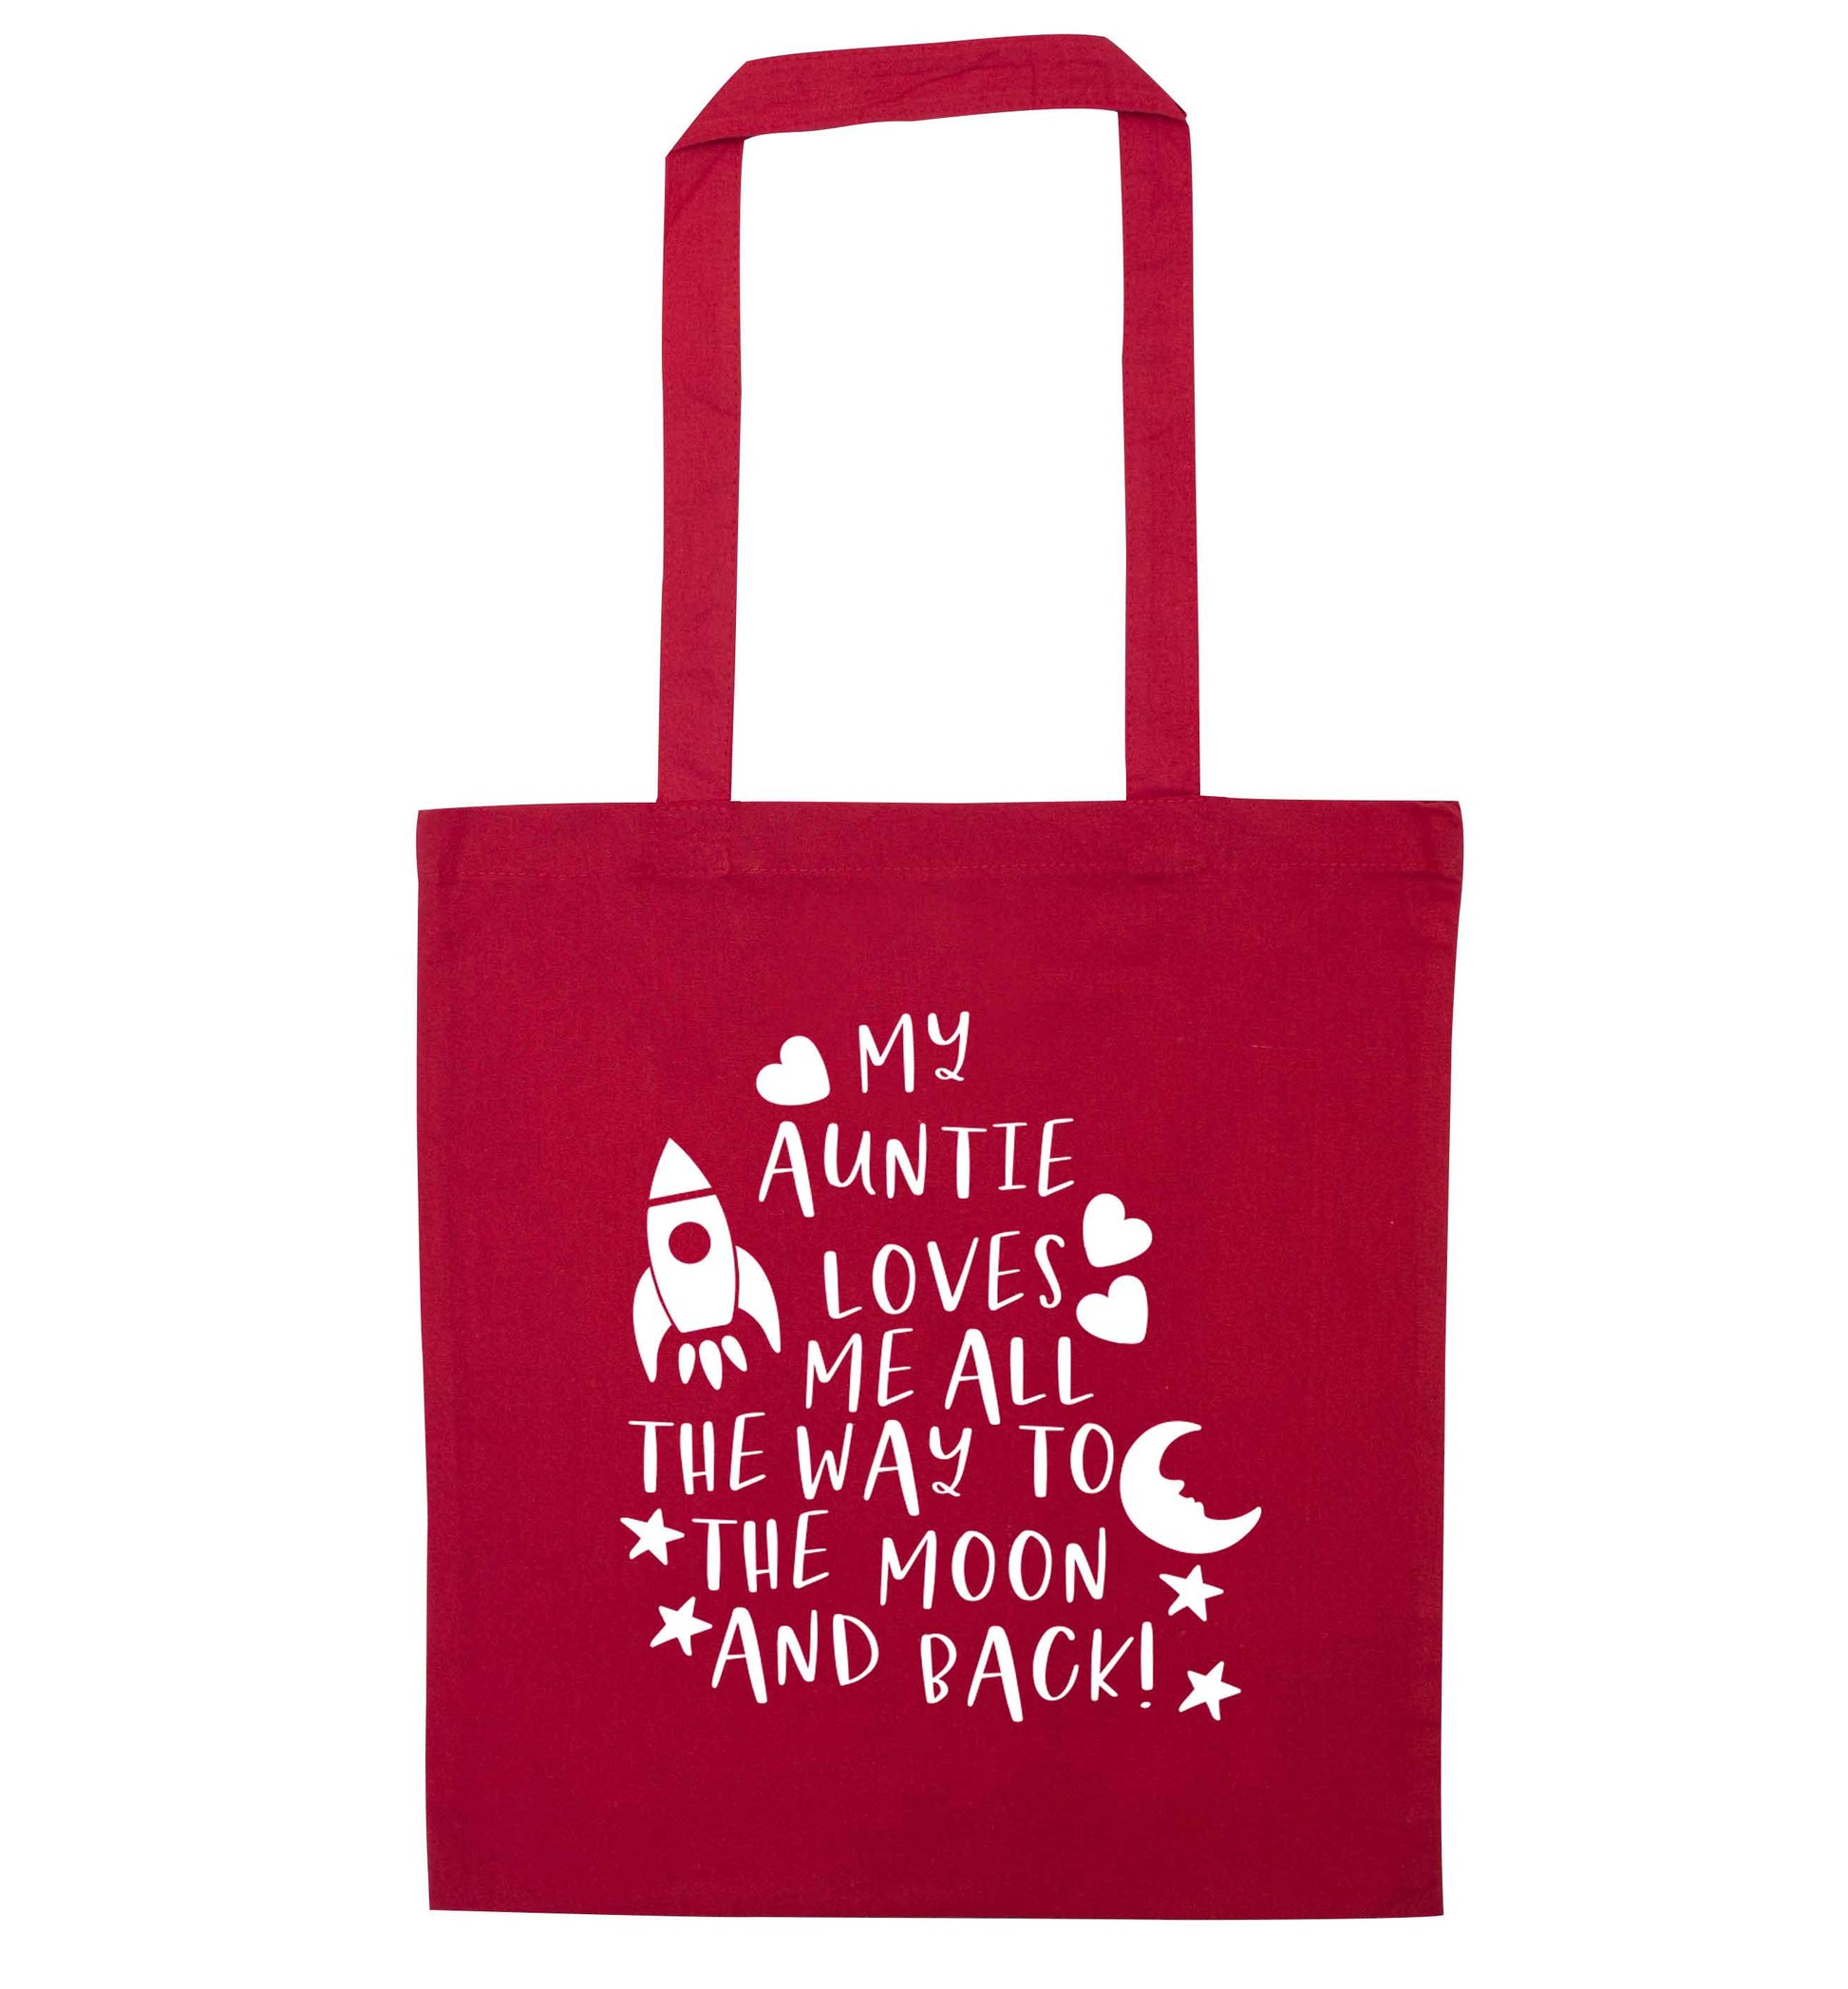 My auntie loves me all the way to the moon and back red tote bag